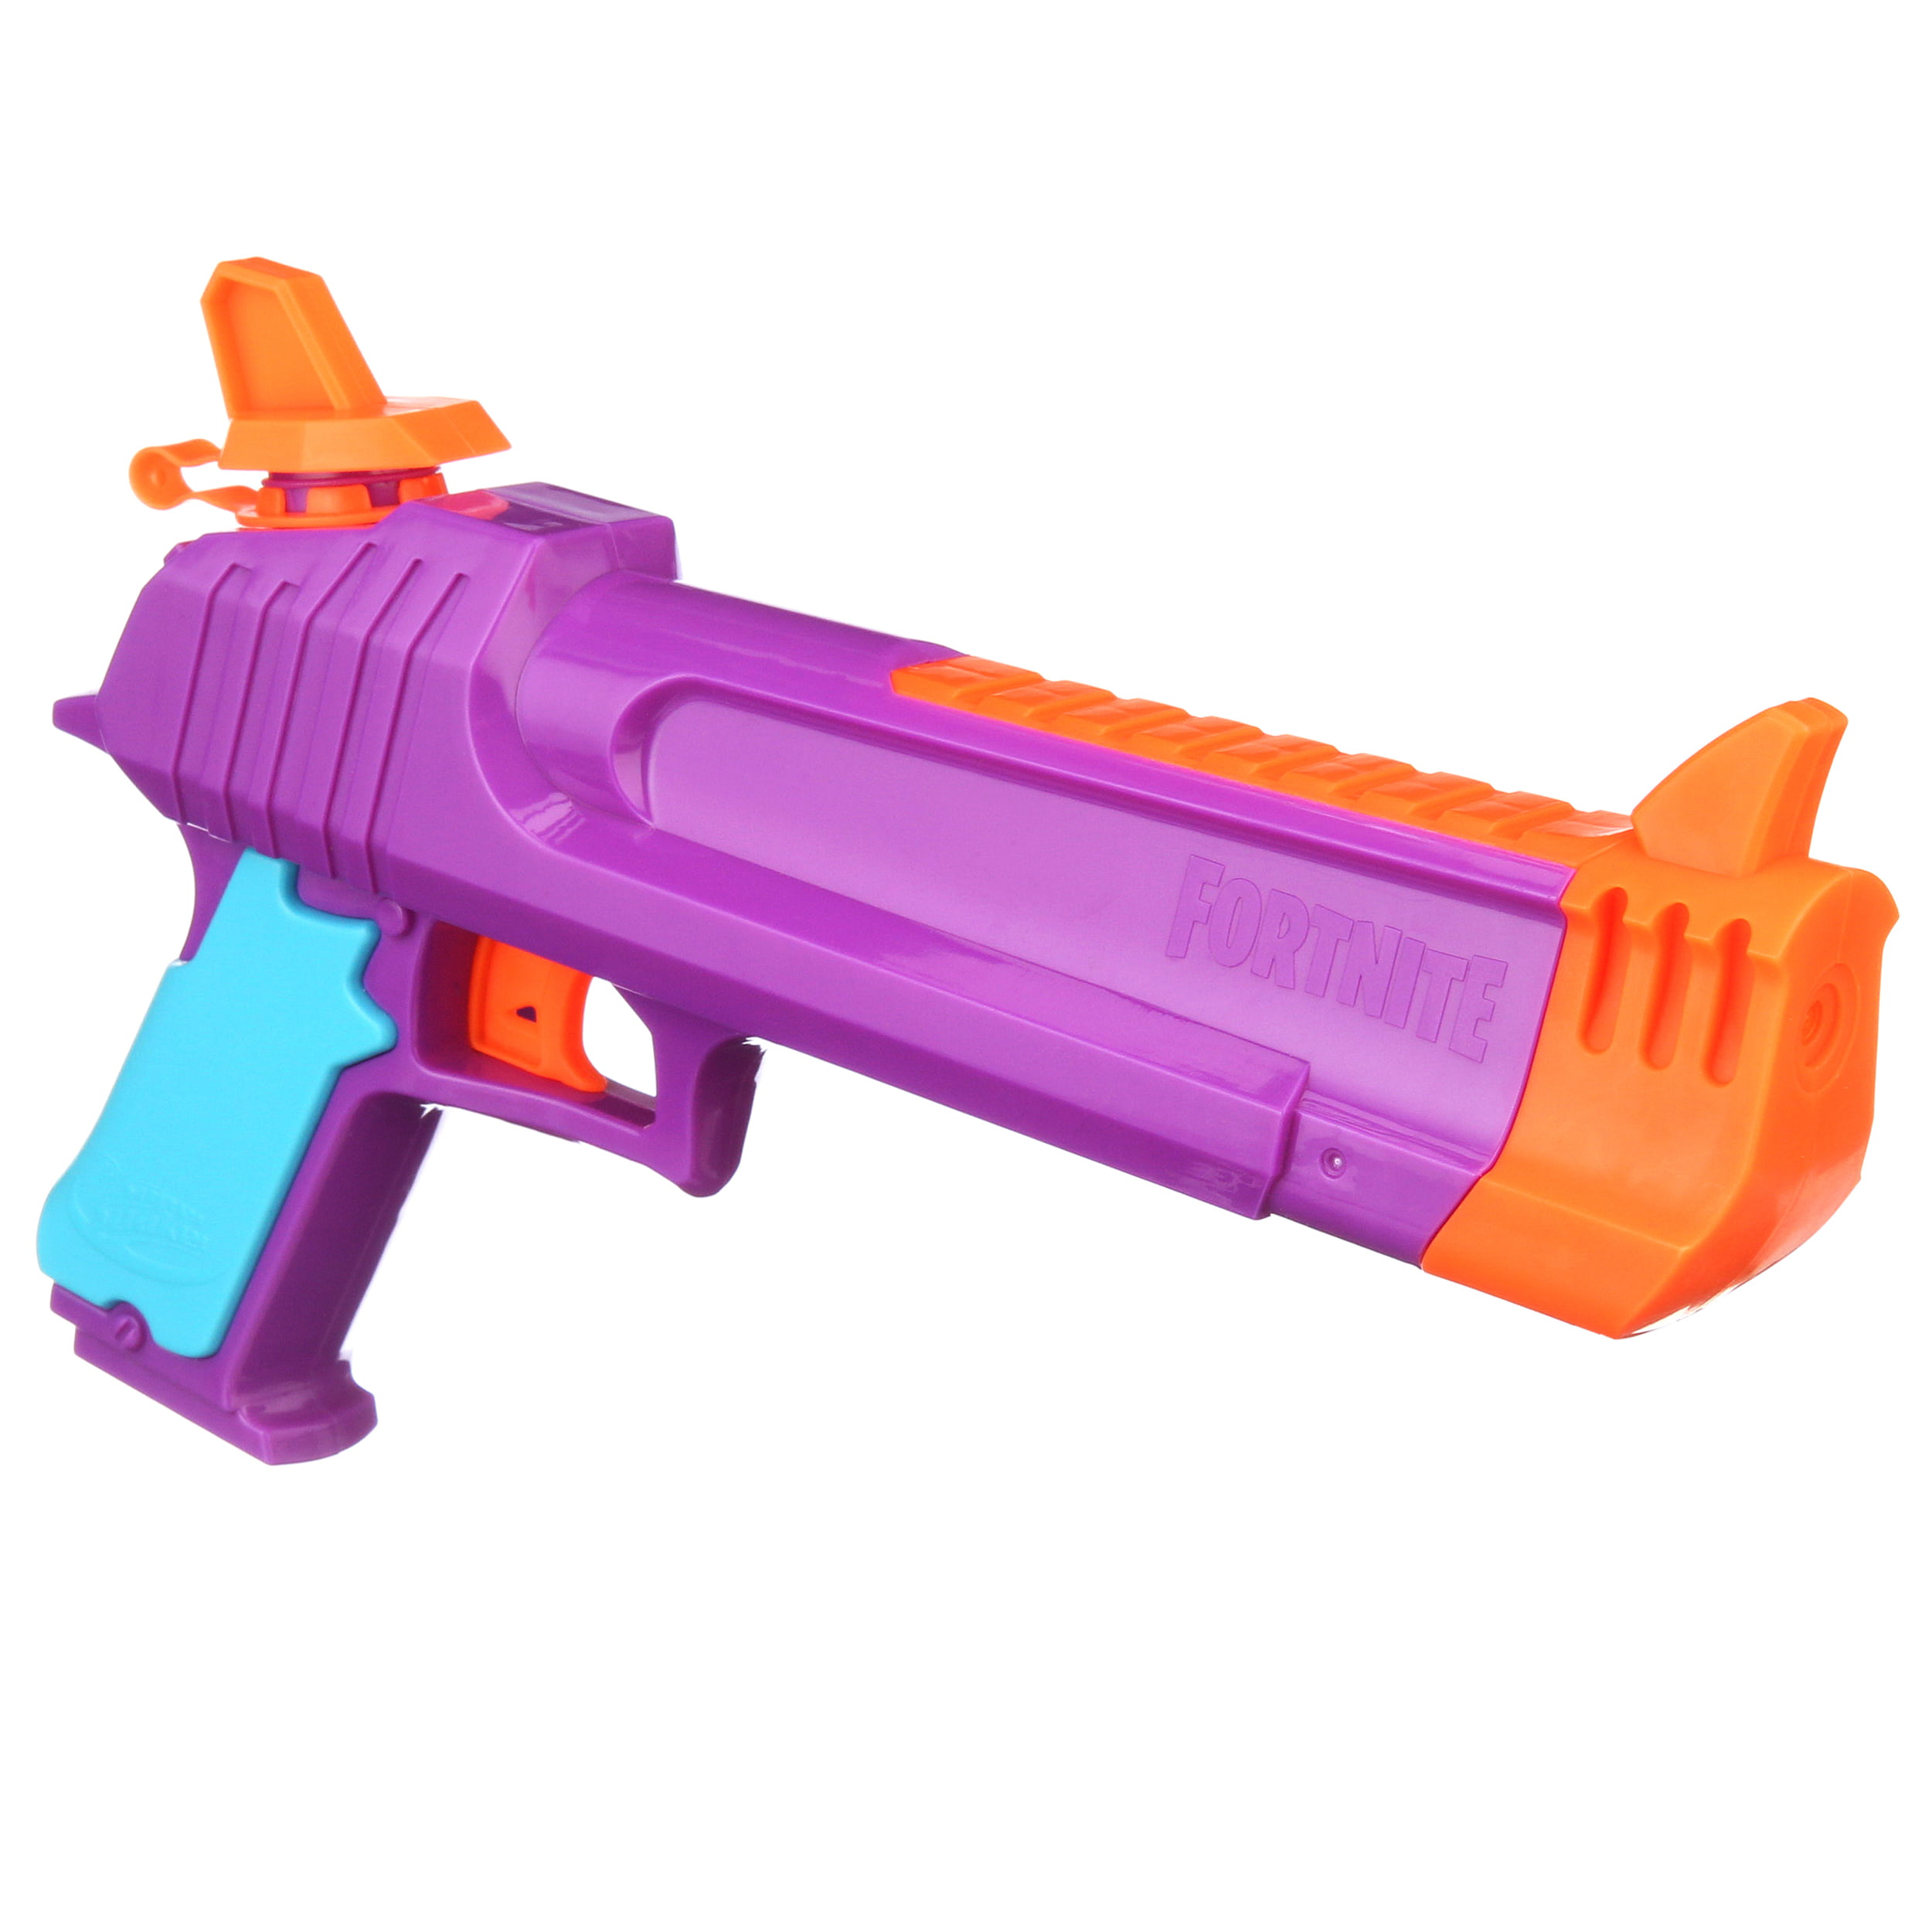 Fortnite Hc E Nerf Super Soaker Toy Water Blaster Pump Action Ages 6 And Up Walmart Com Walmart Com